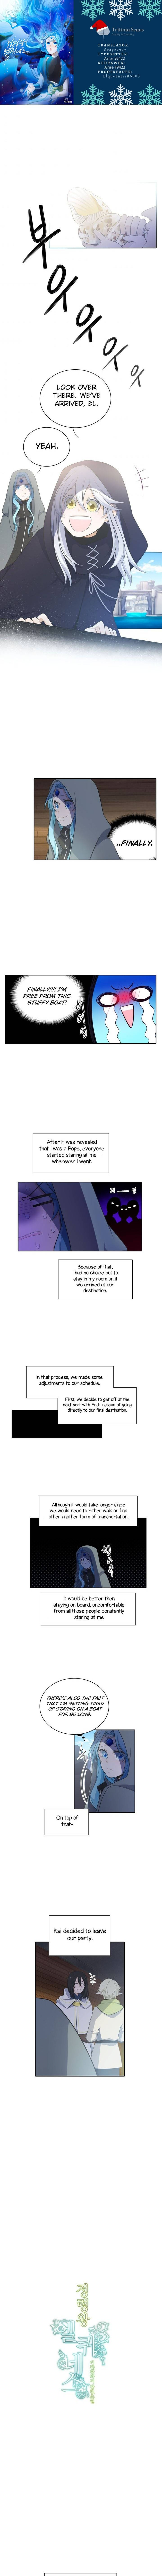 Elqueeness - Page 1